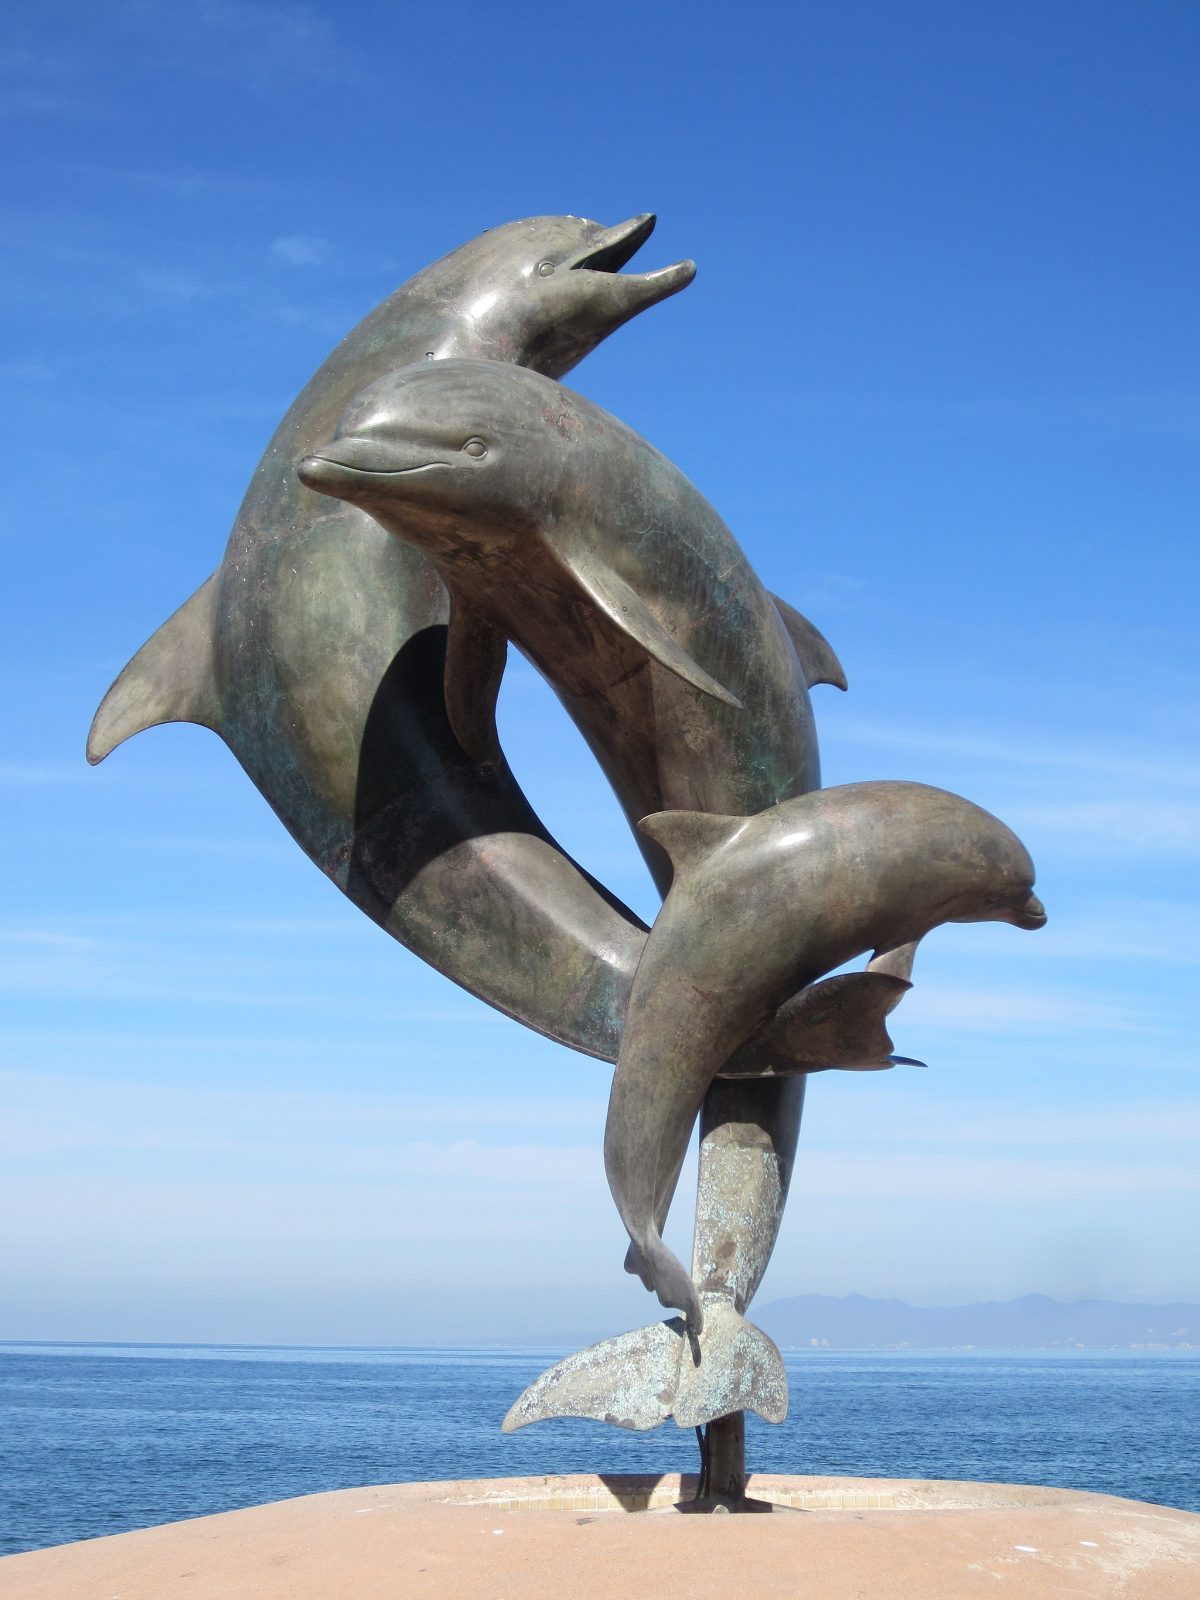 Puerto Vallarta’s Malecon Boardwalk is a sublimely beautiful seafront promenade that runs parallel to the Pacific Ocean